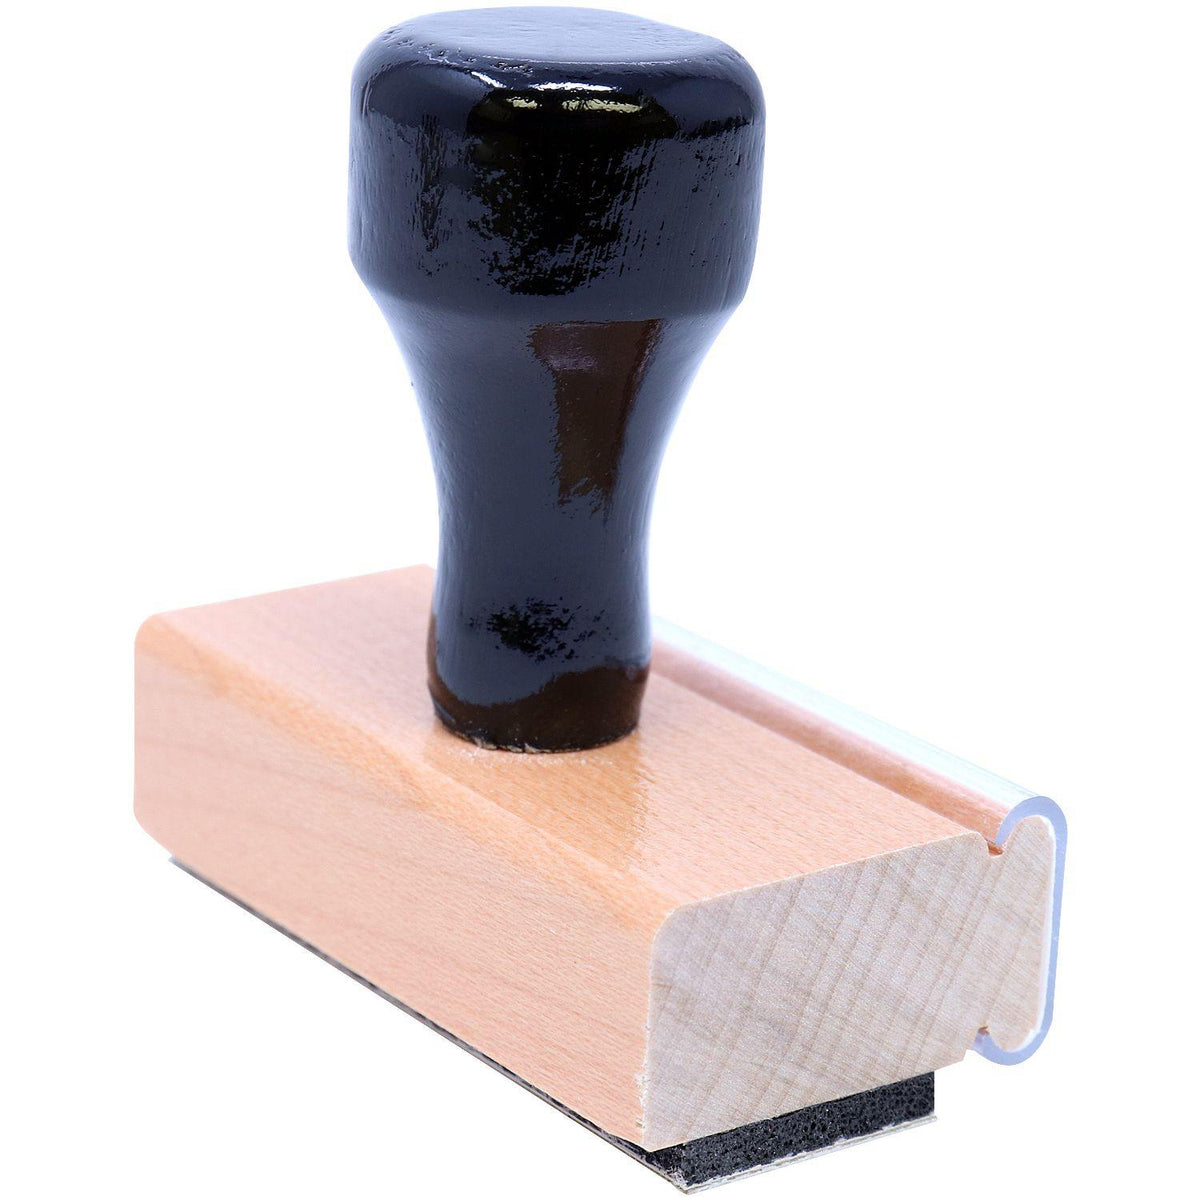 Large Social Distancing 6 Feet Rubber Stamp - Engineer Seal Stamps - Brand_Acorn, Impression Size_Large, Stamp Type_Regular Stamp, Type of Use_General, Type of Use_Medical Office